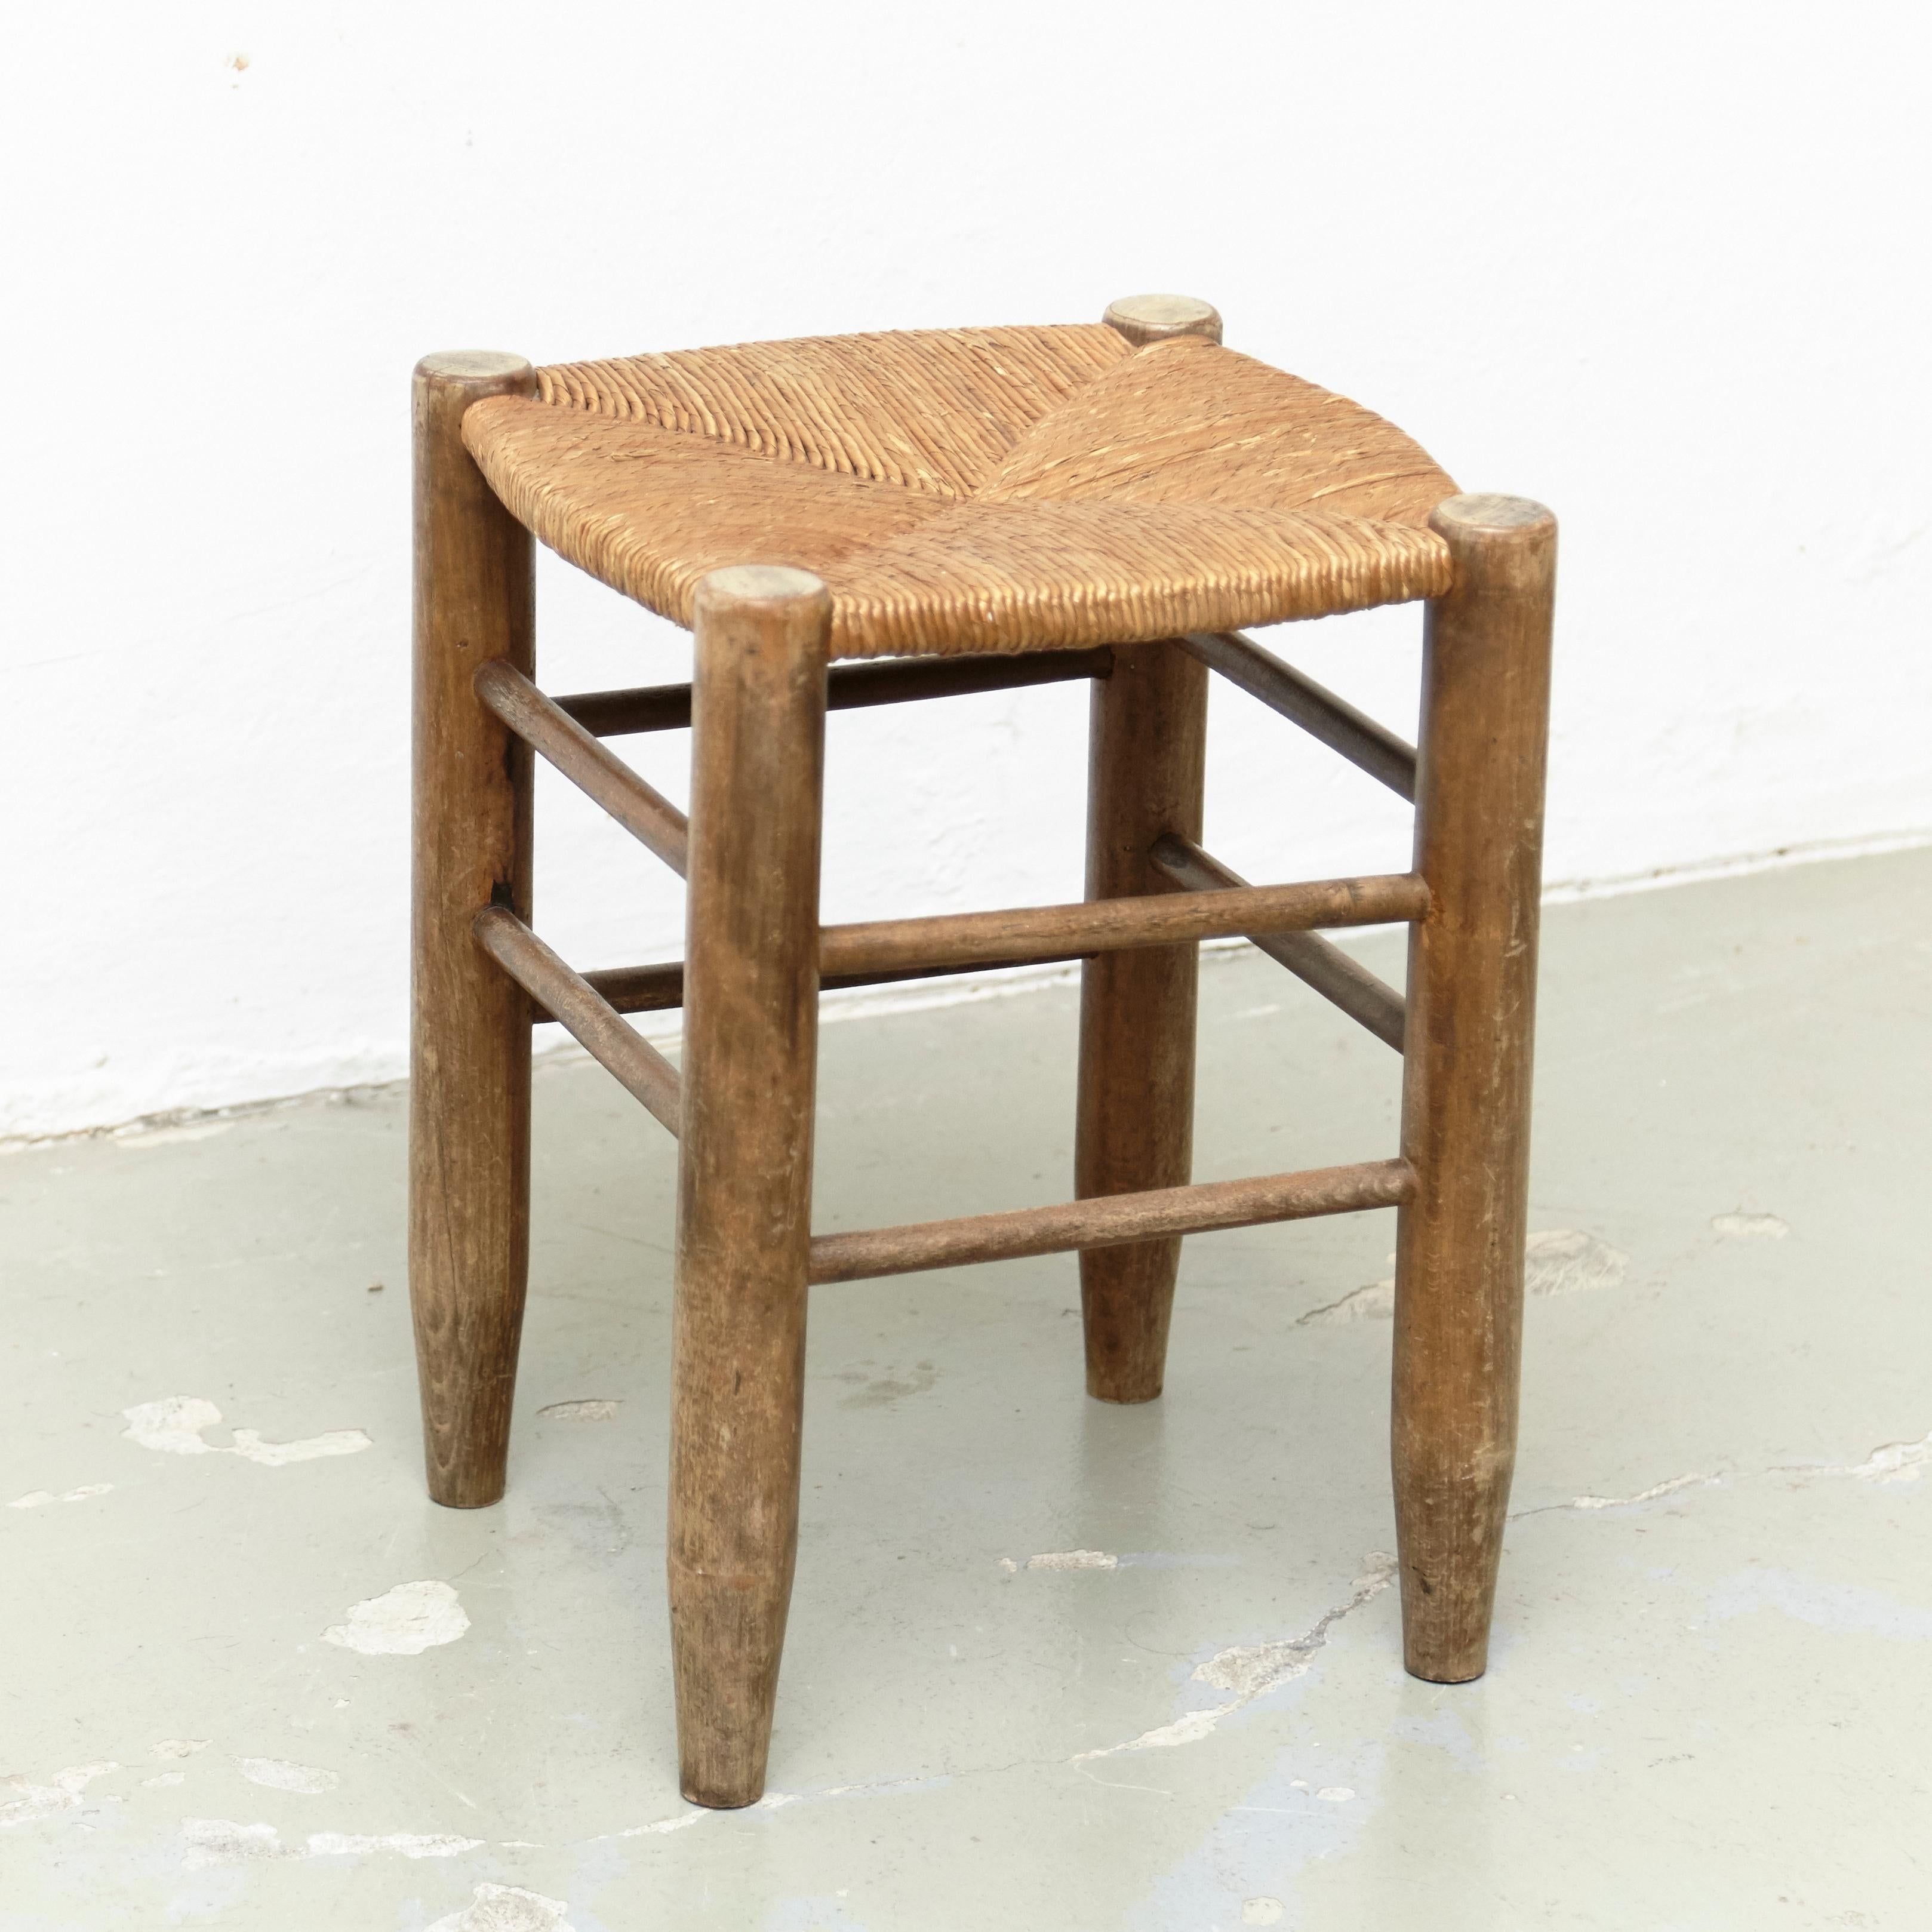 Stool designed by Charlotte Perriand, circa 1950.
Manufactured in France.
Wood and rattan. 

In original condition, with minor wear consistent with age and use, preserving a beautiful patina.

Charlotte Perriand (1903-1999) She was born in